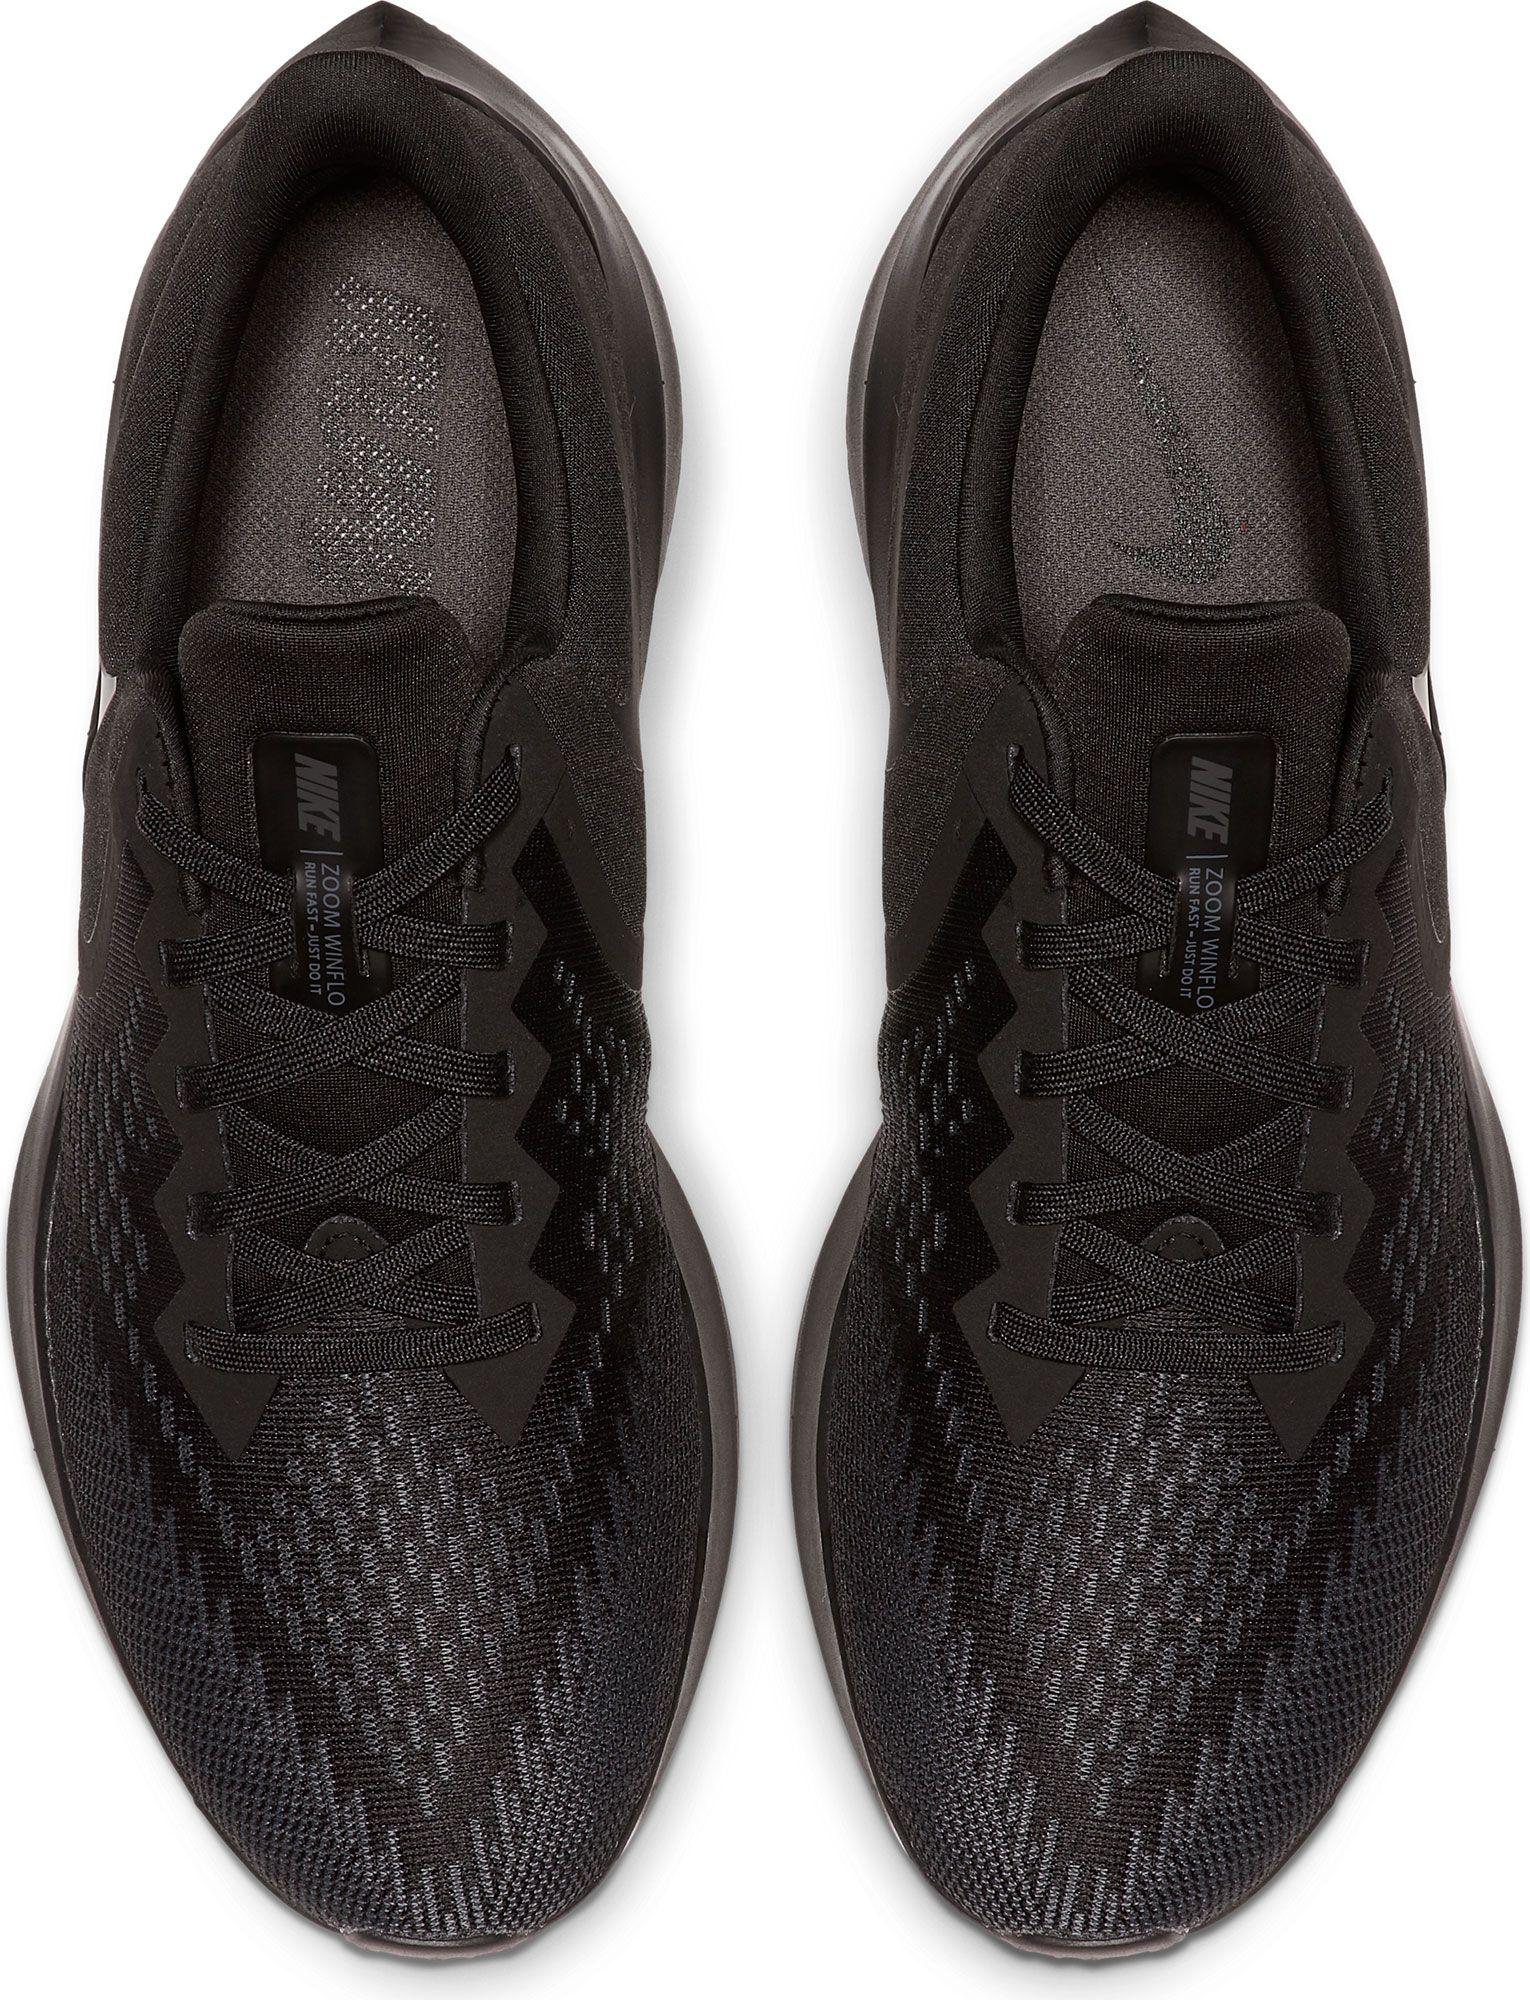 Nike Rubber Zoom Winflo 6 Running Shoes in Black/Anthracite (Black) for ...